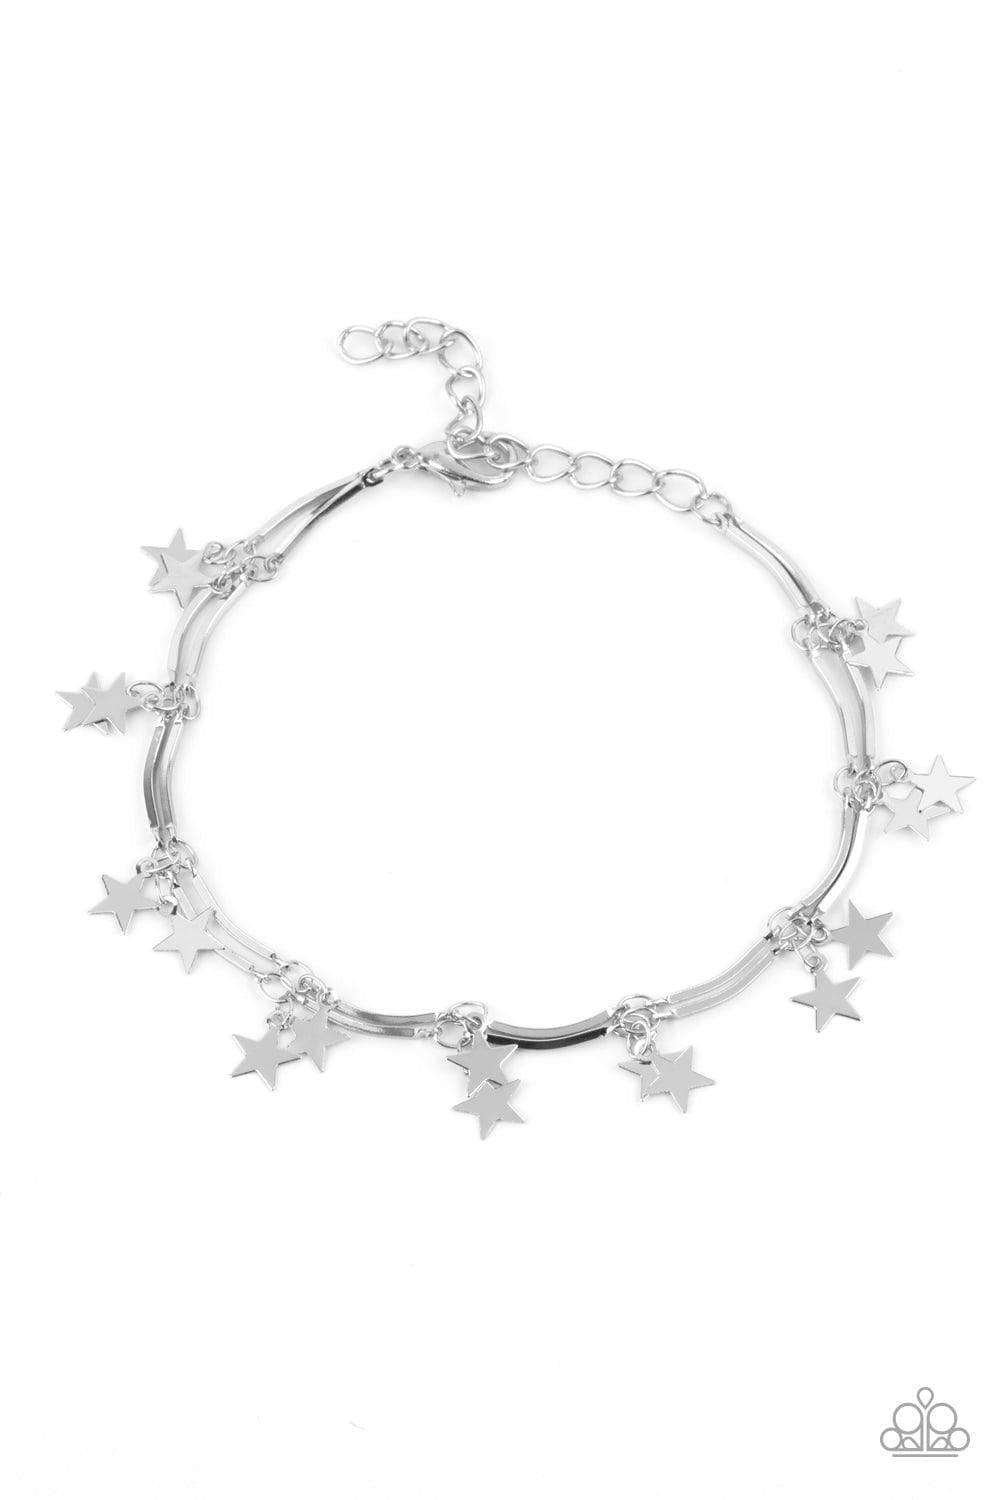 Paparazzi Accessories - Party In The Usa - Silver Bracelet - Bling by JessieK